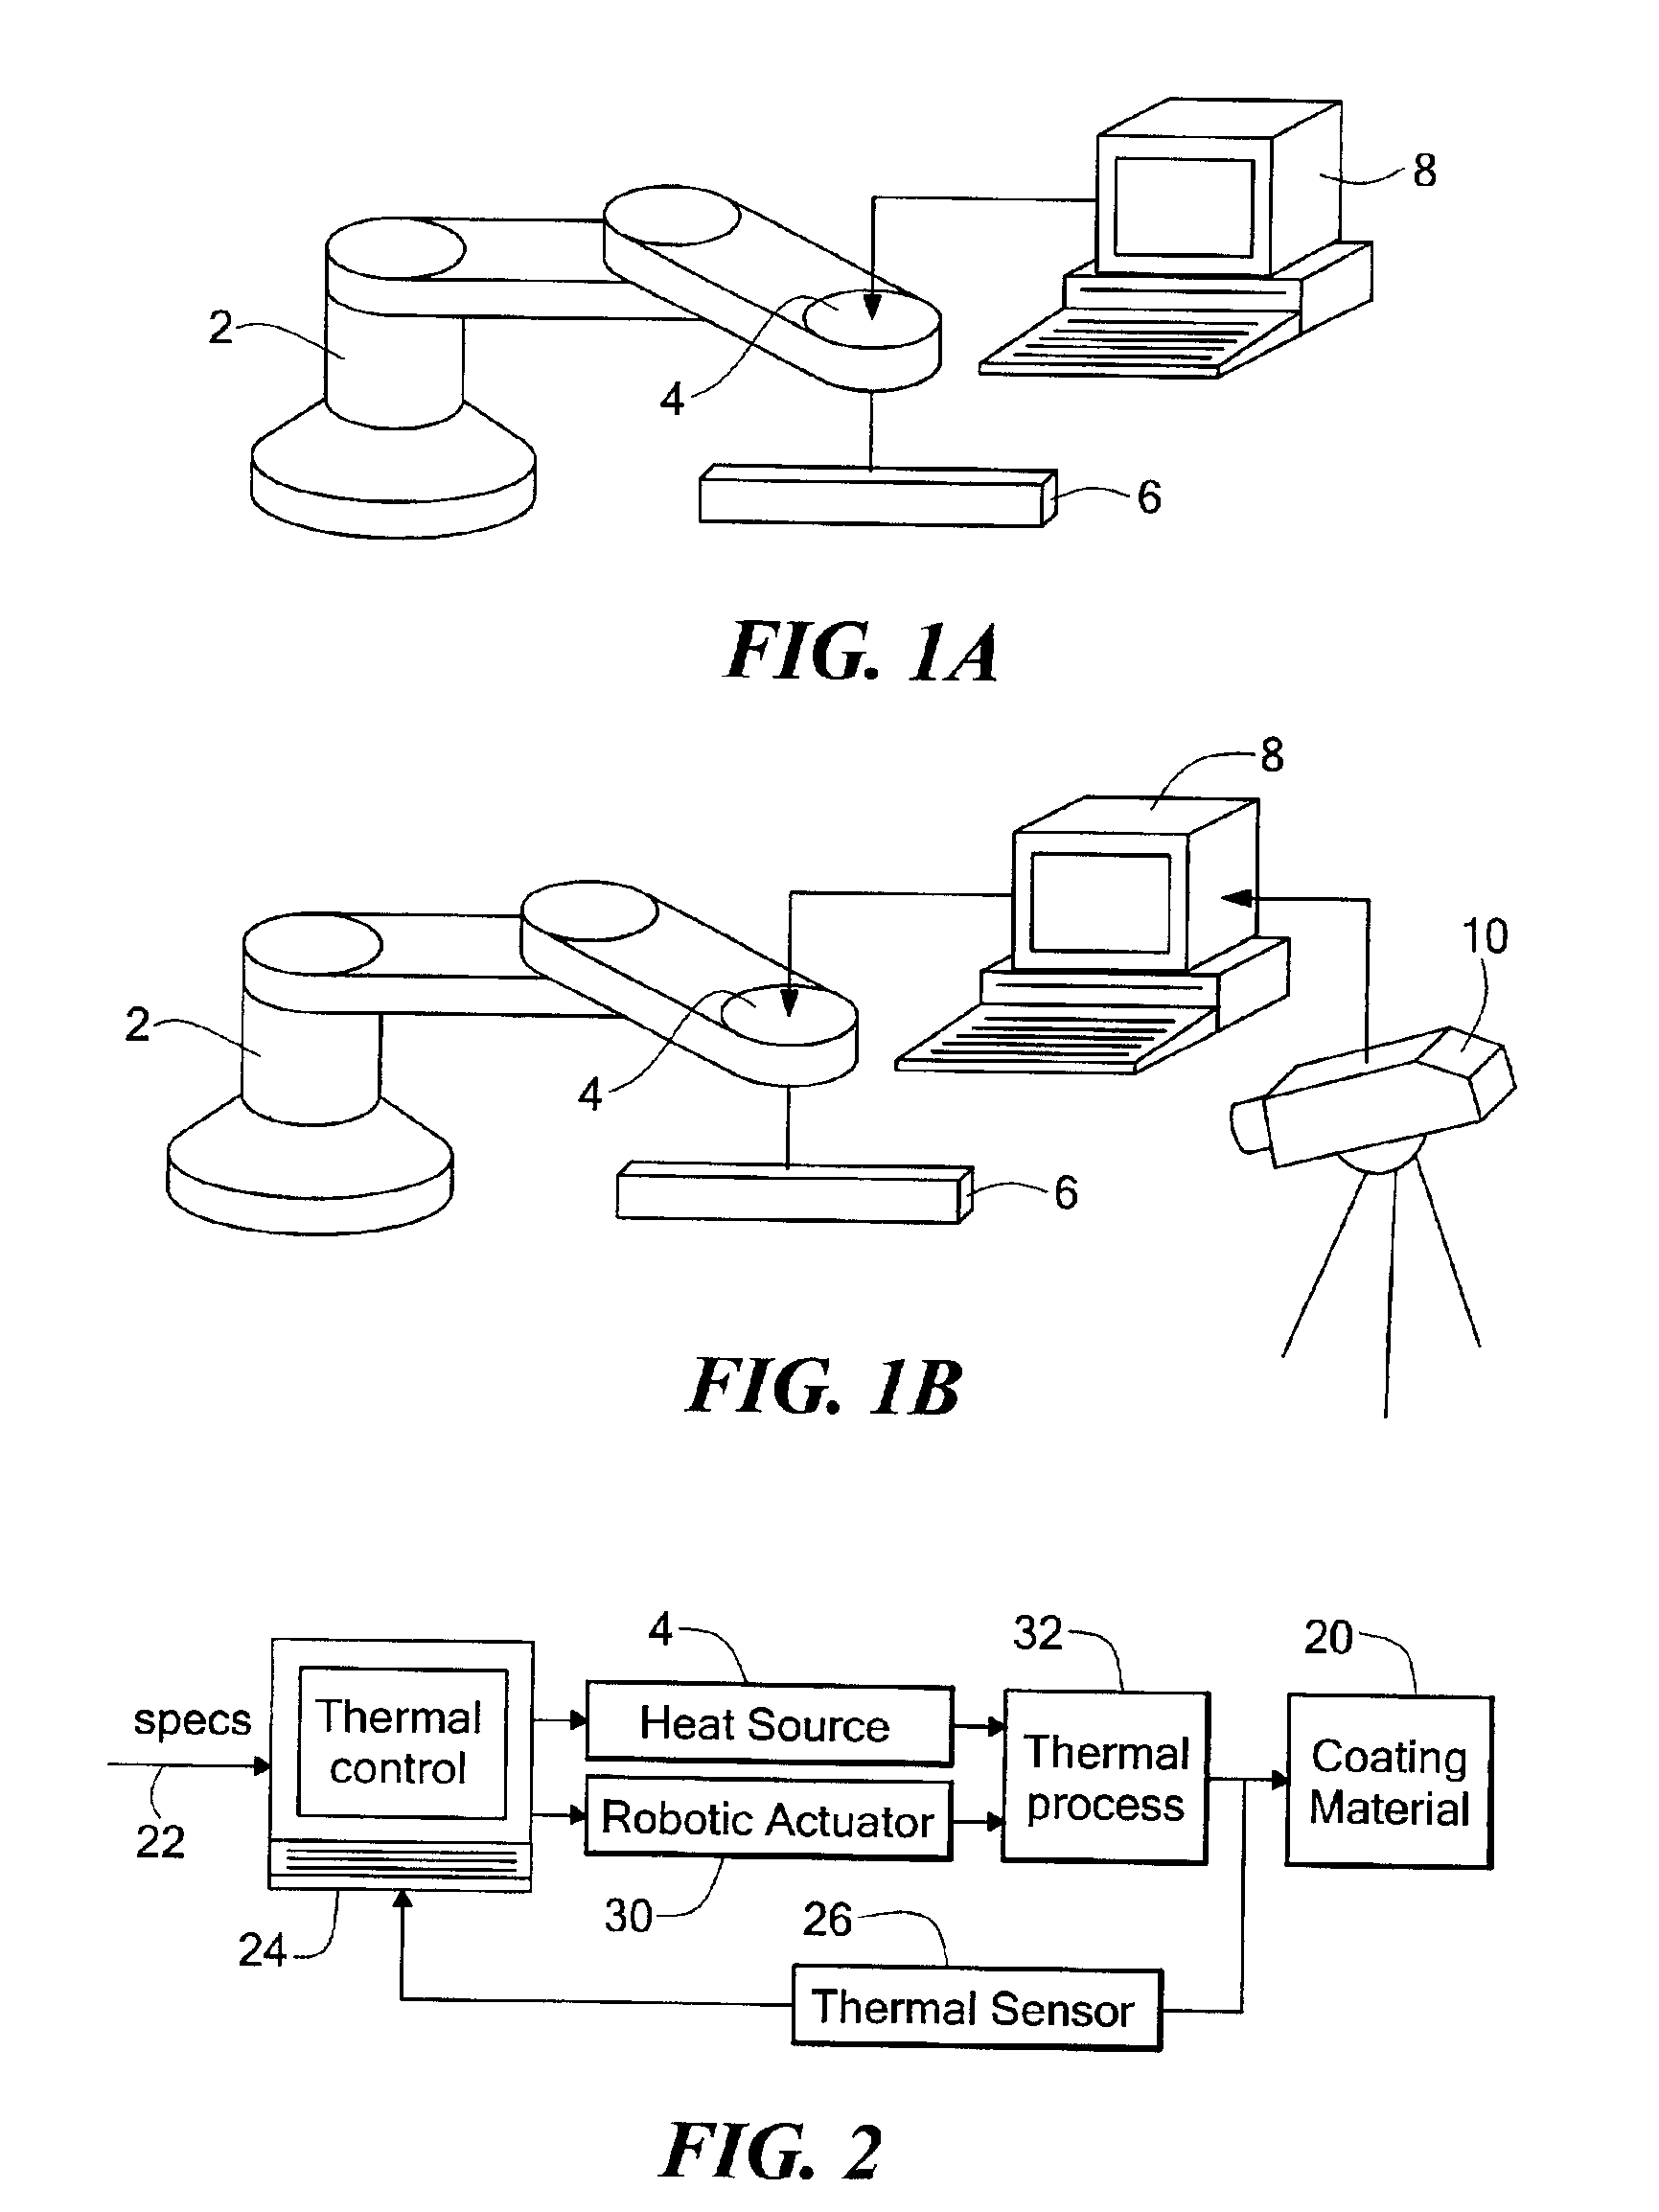 Process of forming a composite coating on a substrate